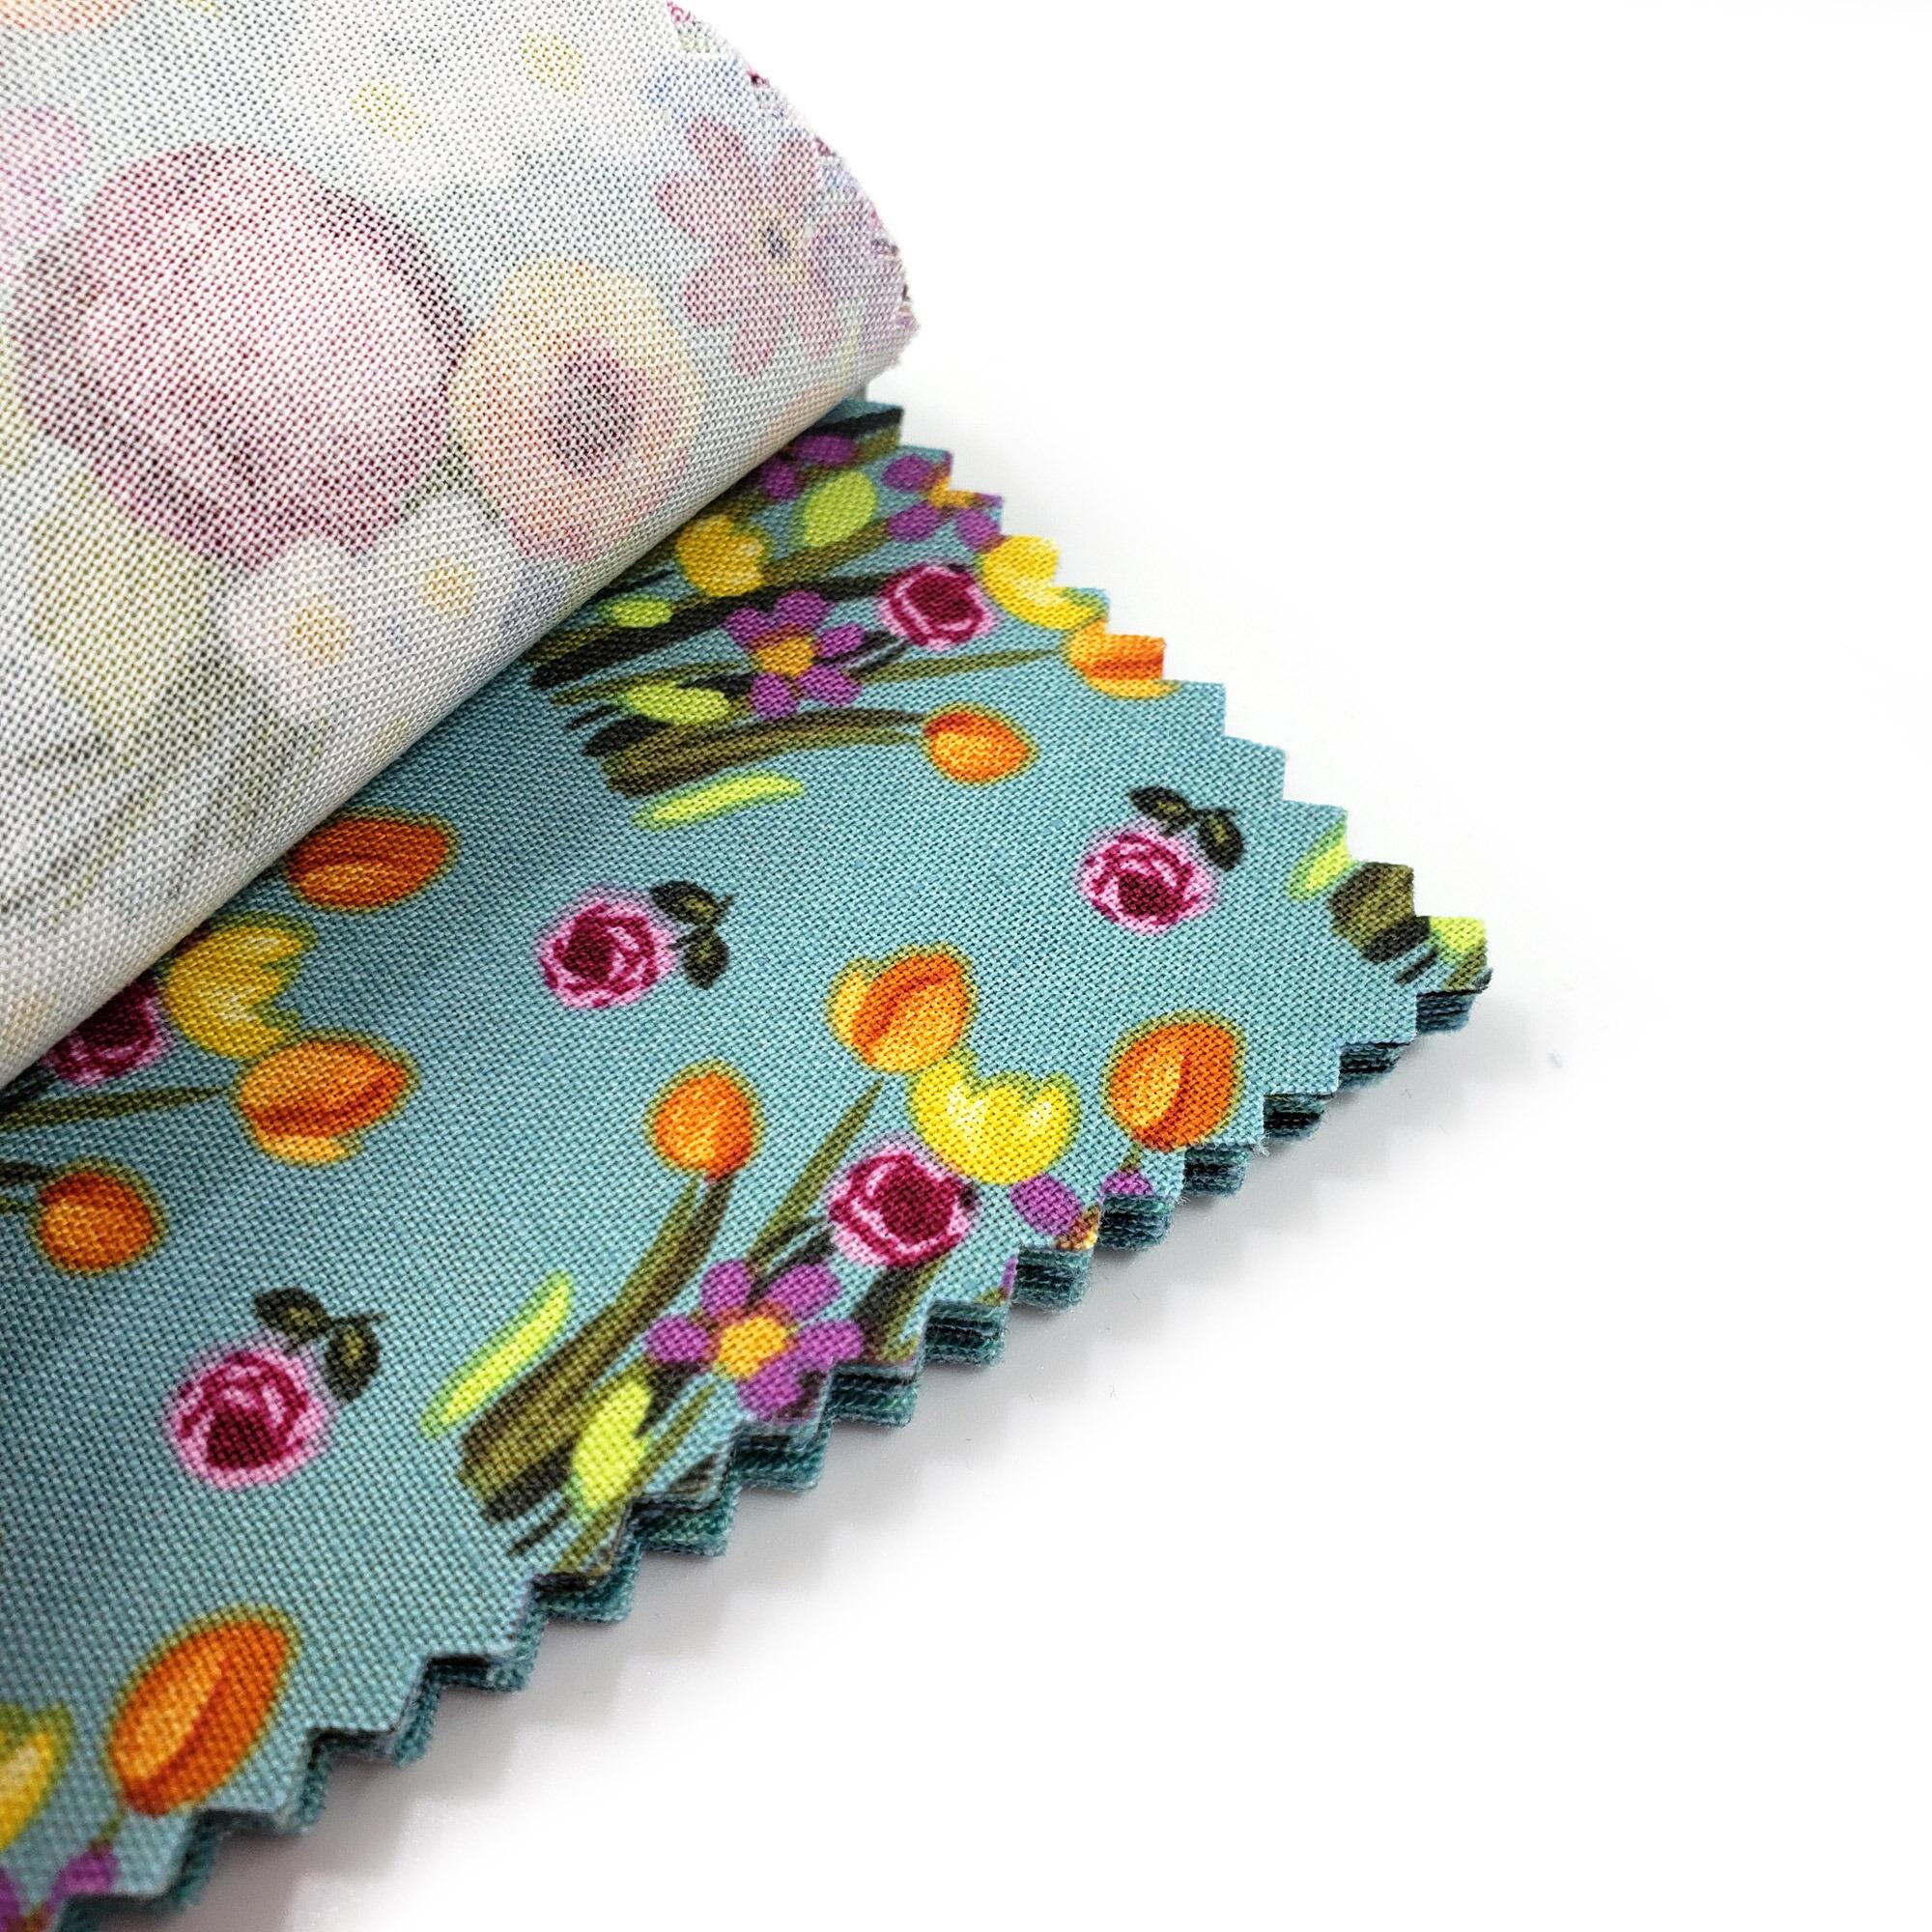 riley blake stacker, floralicious,floral,flowers,garden,baby quilt, patchwork, cotton squares